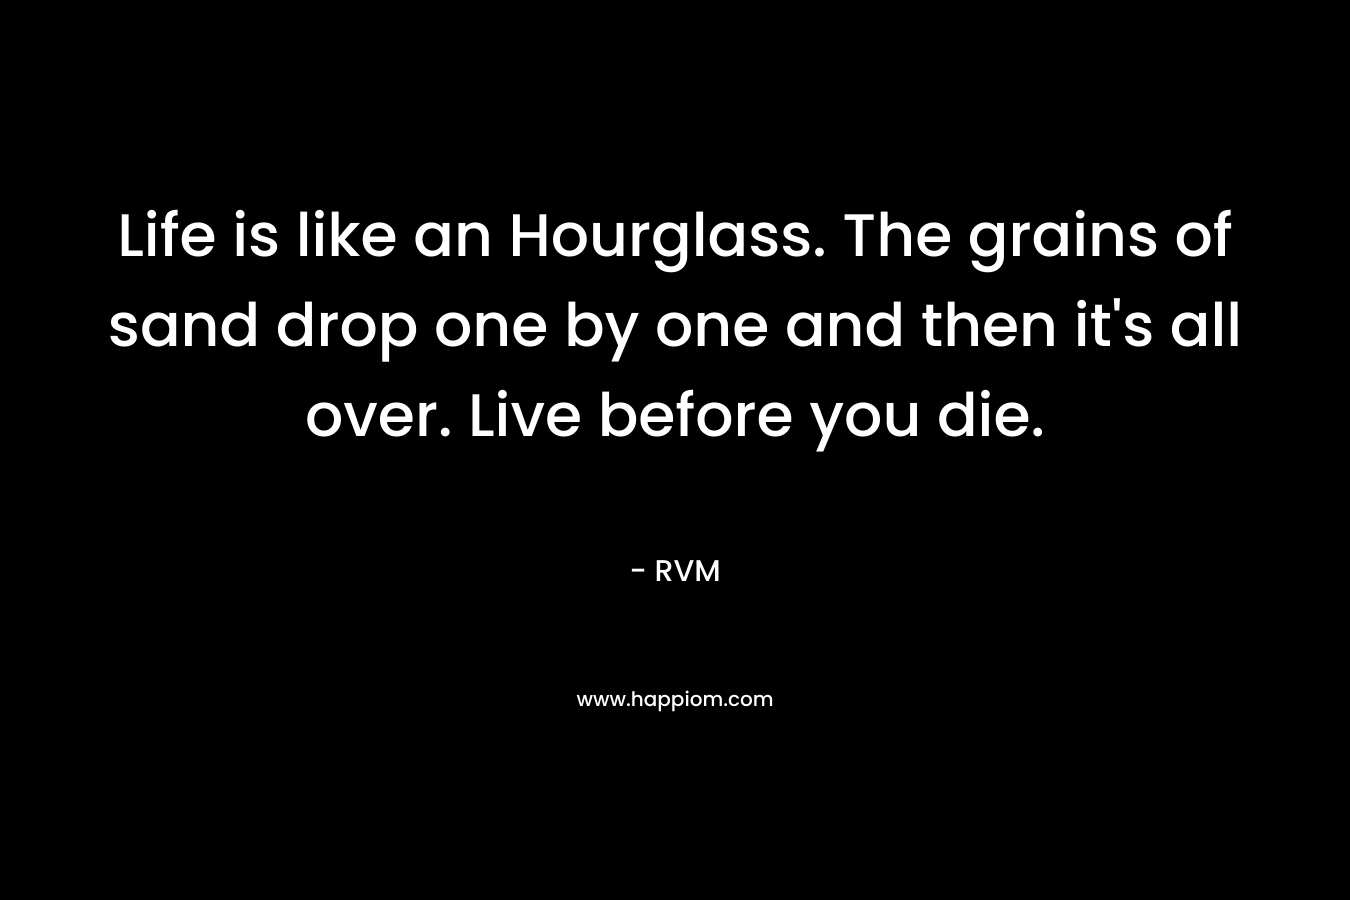 Life is like an Hourglass. The grains of sand drop one by one and then it's all over. Live before you die.